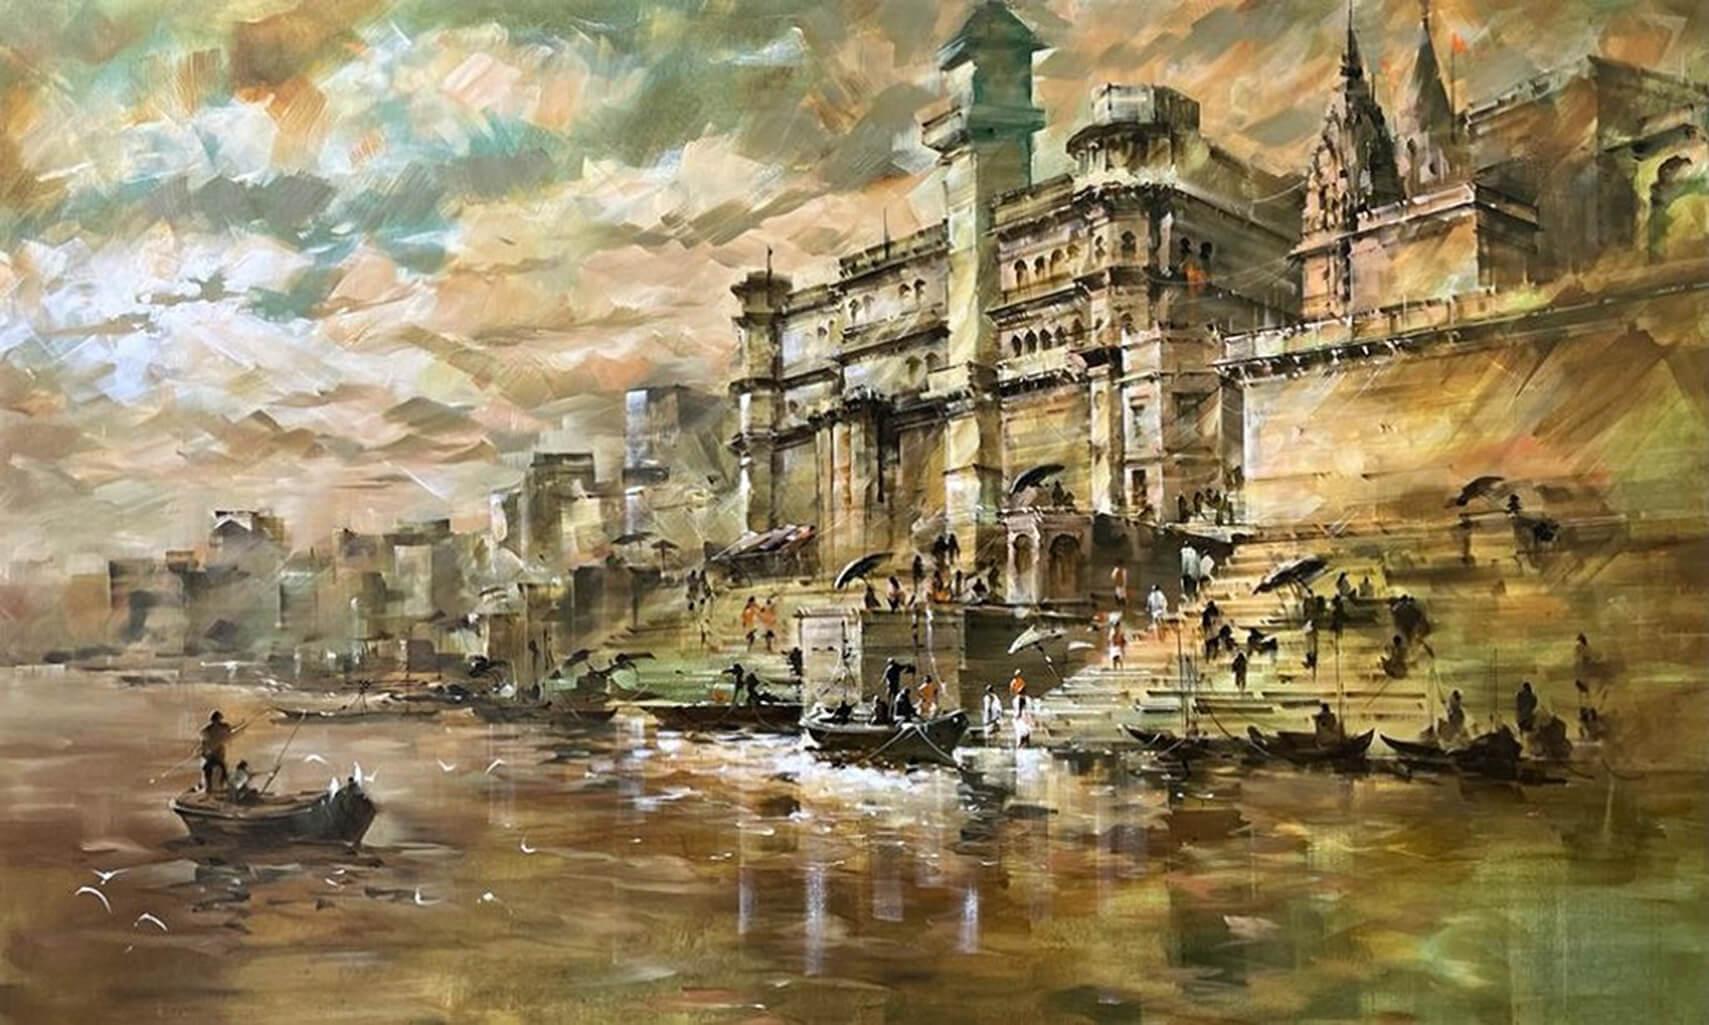 Sandeep Chhatraband Figurative Painting - Cityscape, Acrylic on Canvas by Contemporary Indian Artist "In Stock"